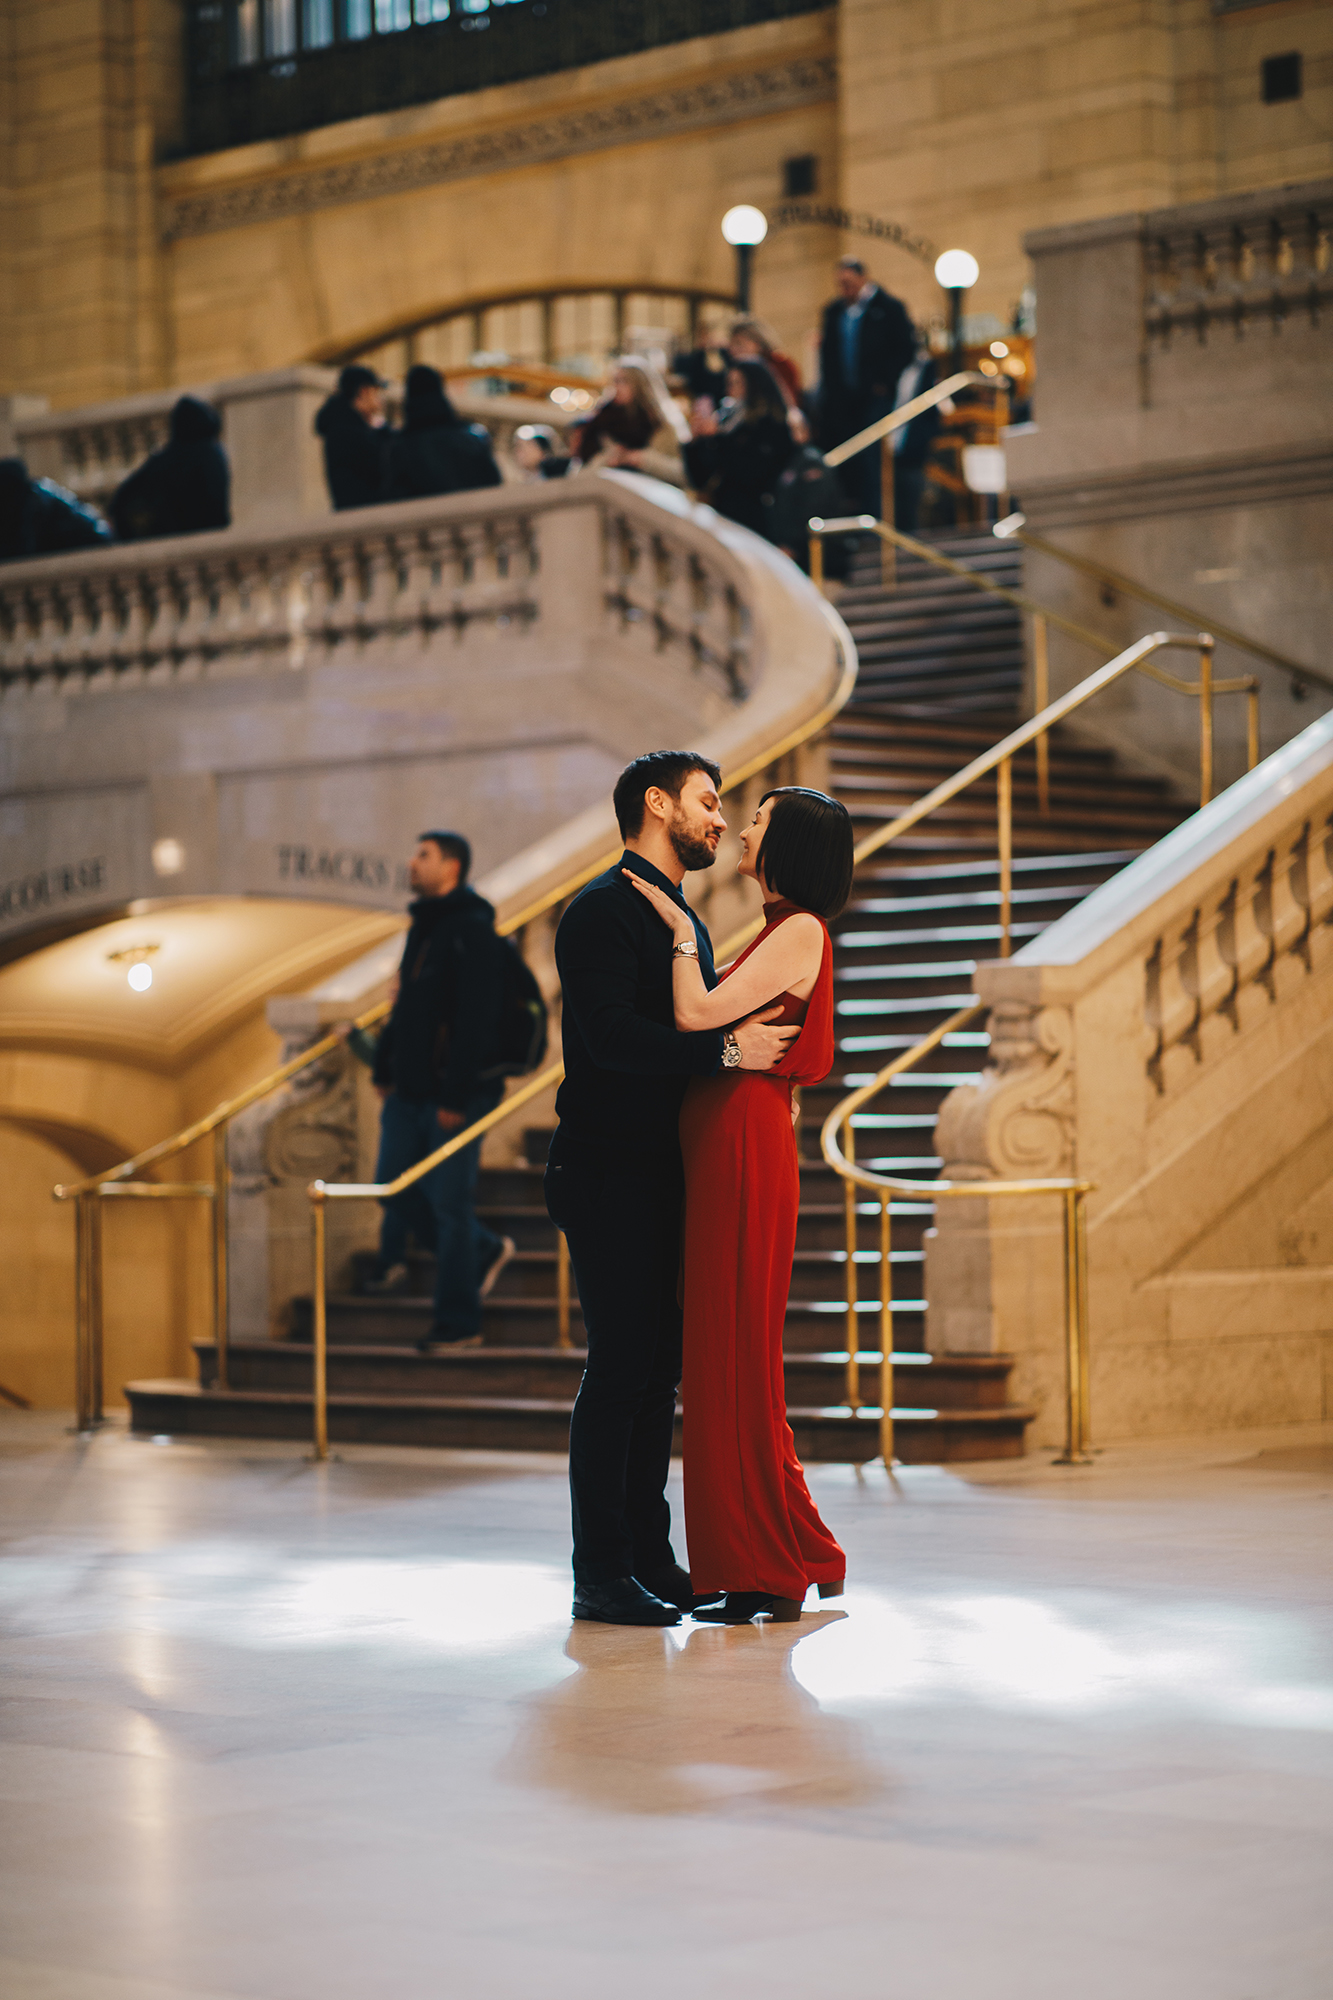 Romantic Times Square Engagement Photos and Grand Central Engagement Photography in New York